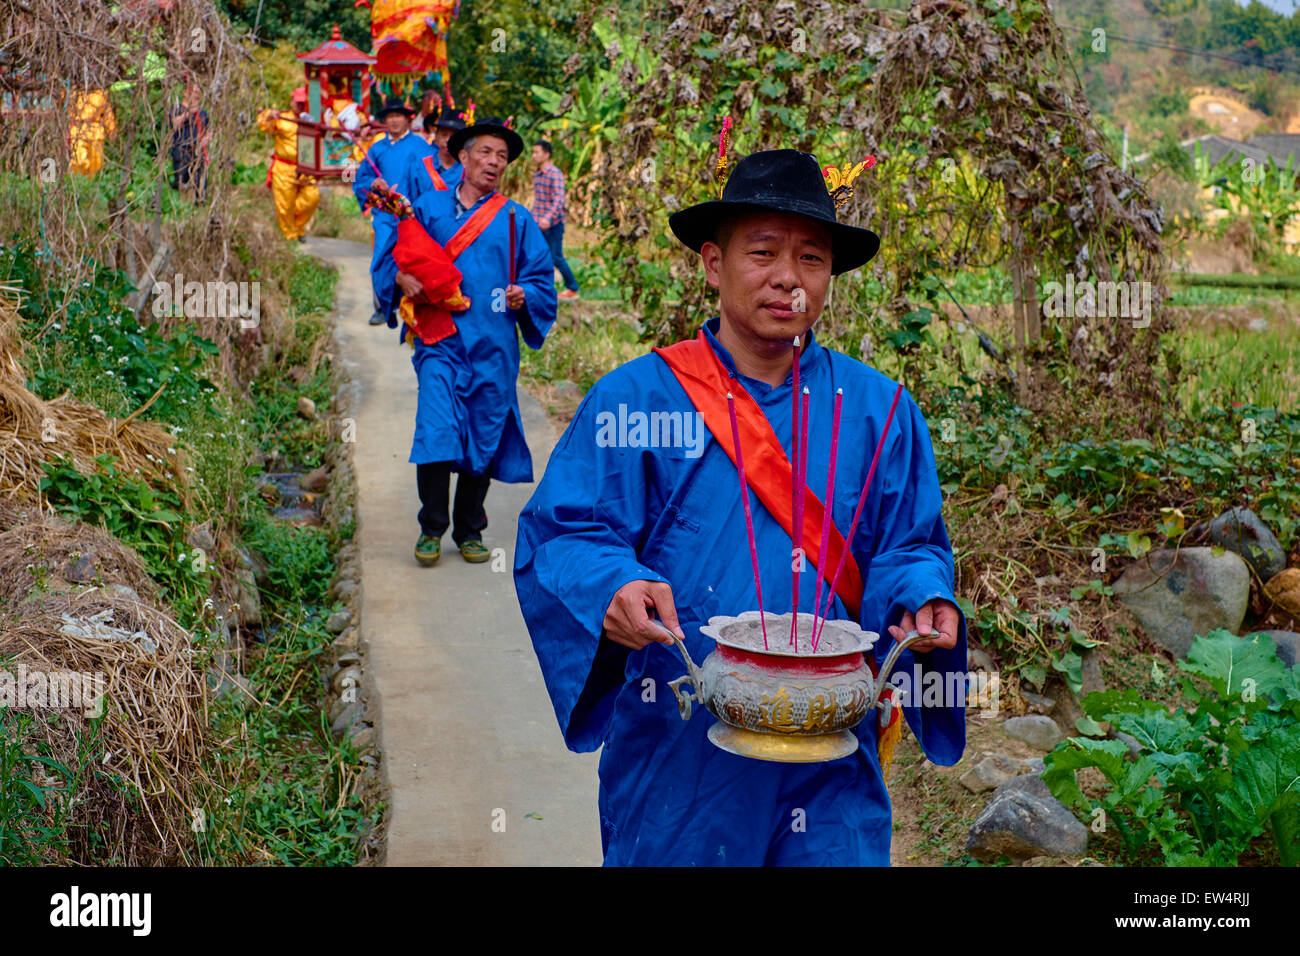 China, Fujian province, Taxia village, religious festival, the monk show the gods statues to the villagers Stock Photo